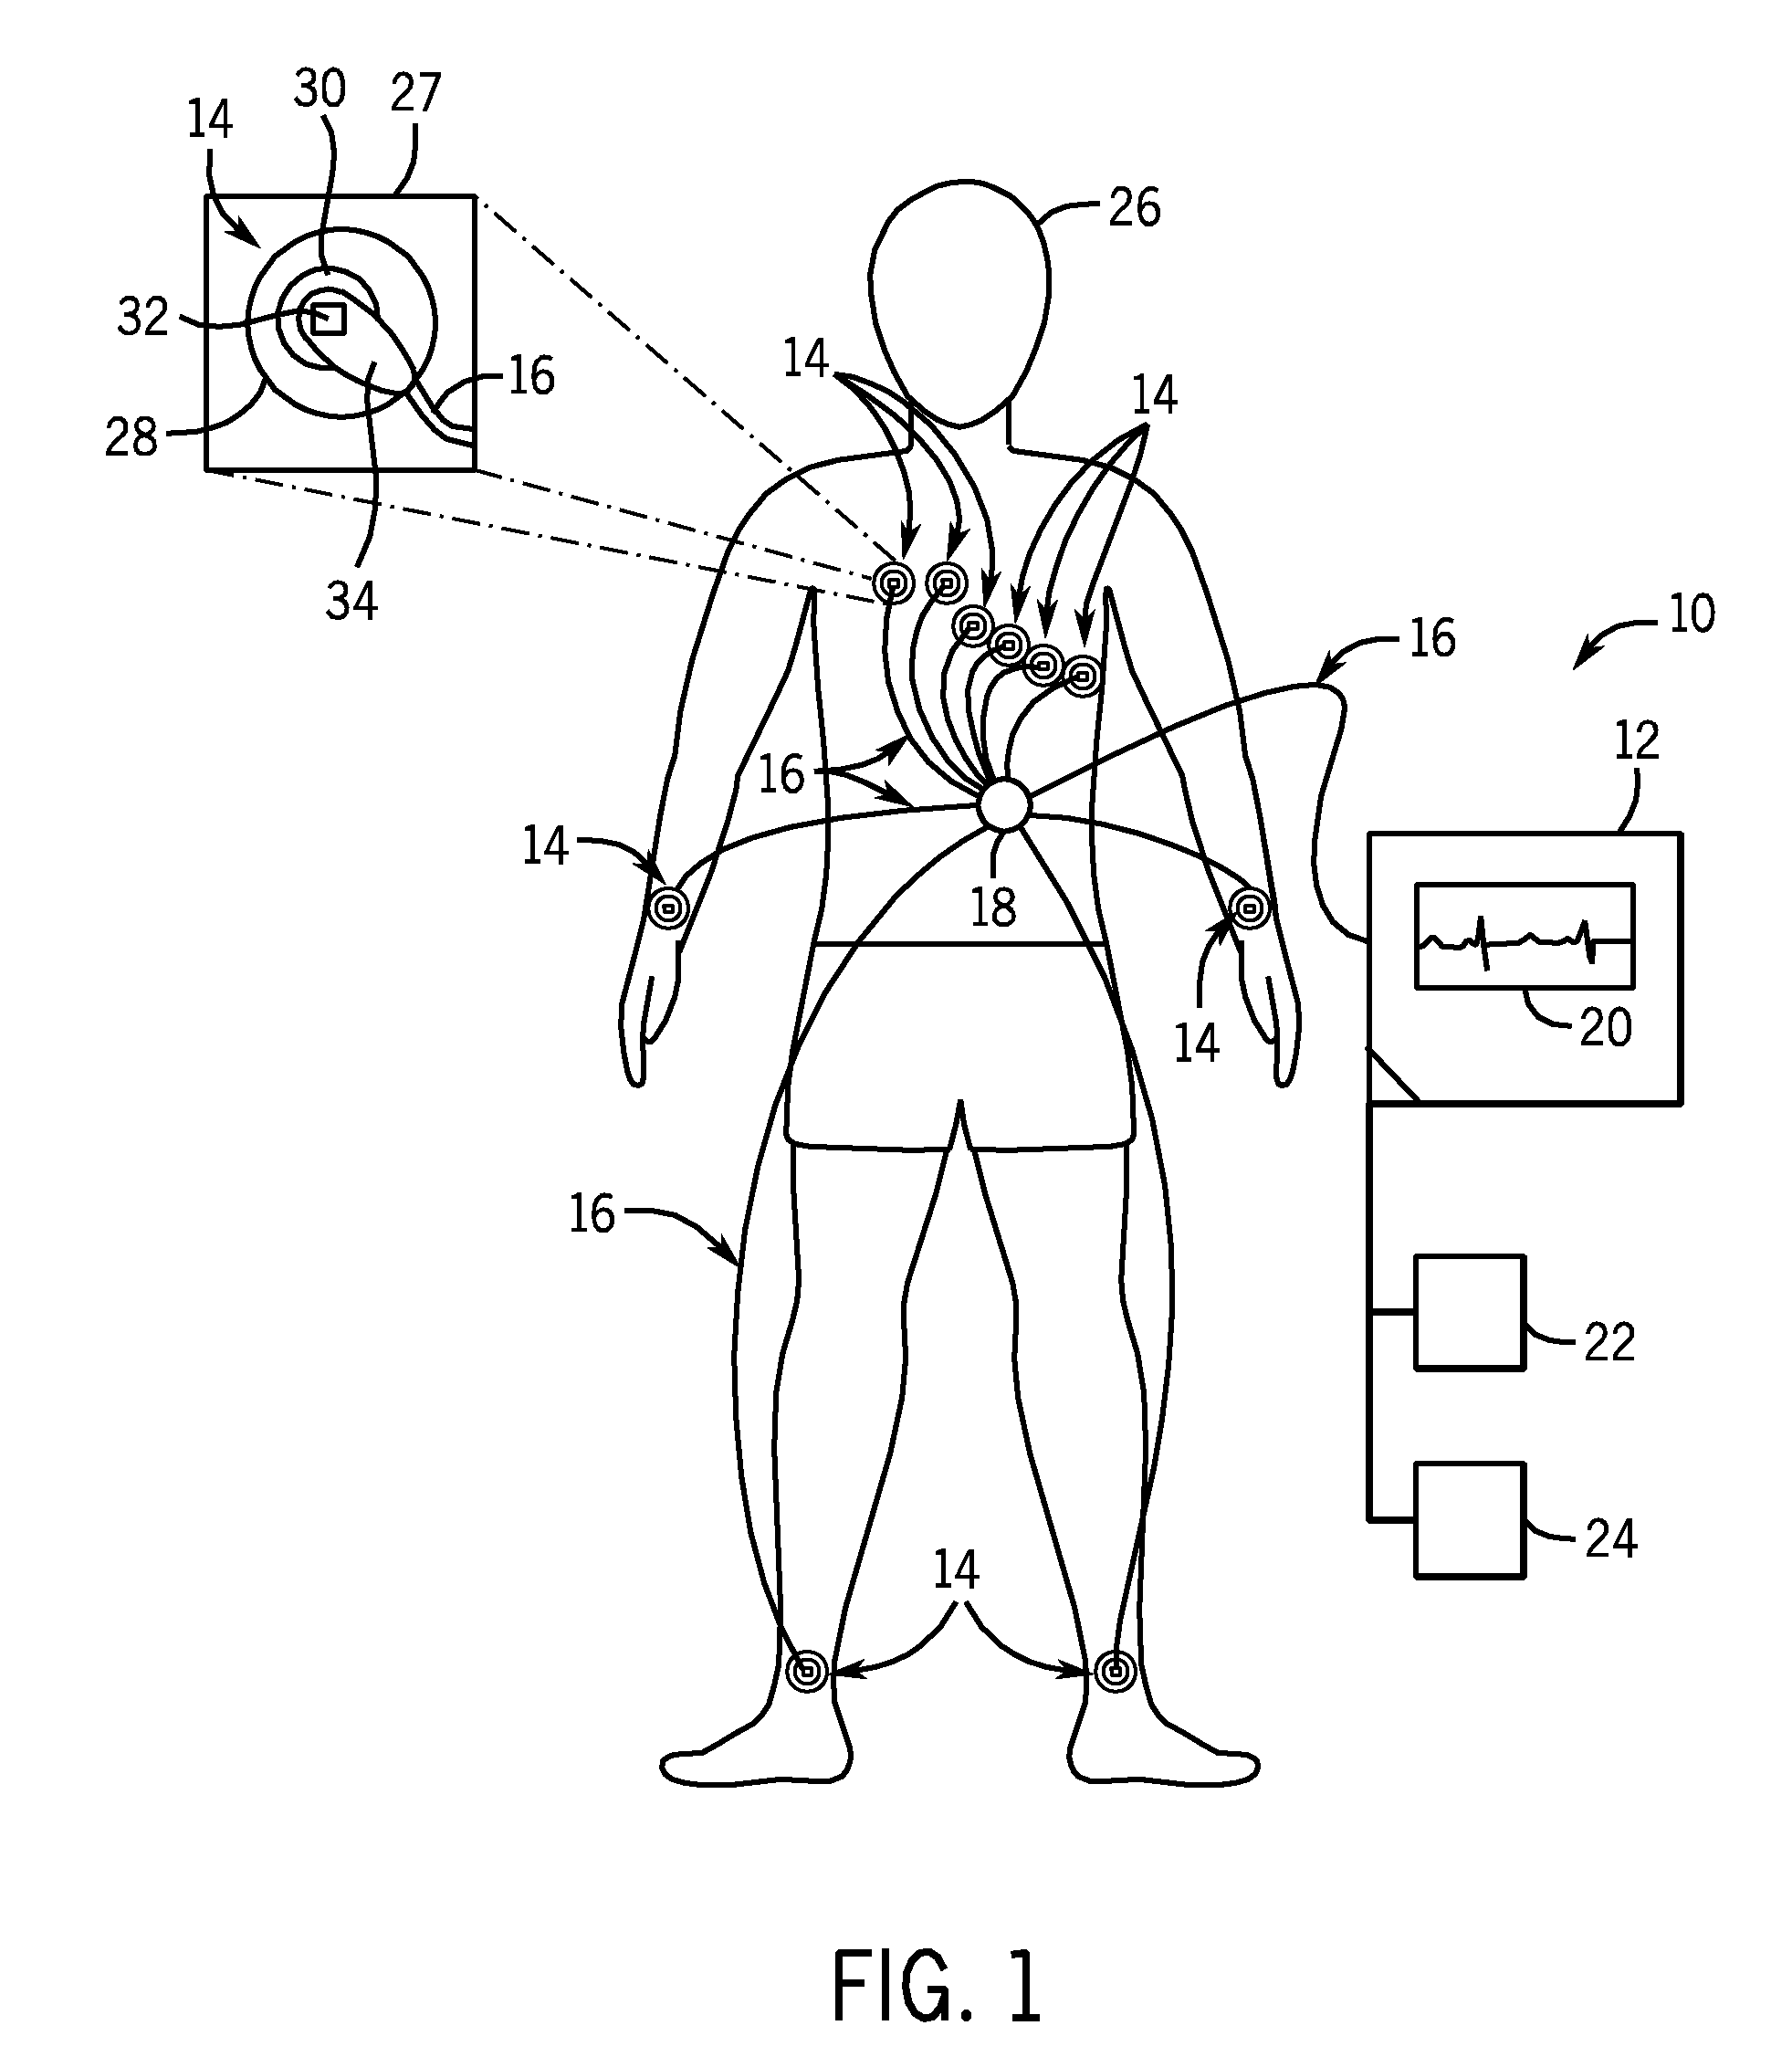 System and method of performing electrocardiography with motion detection